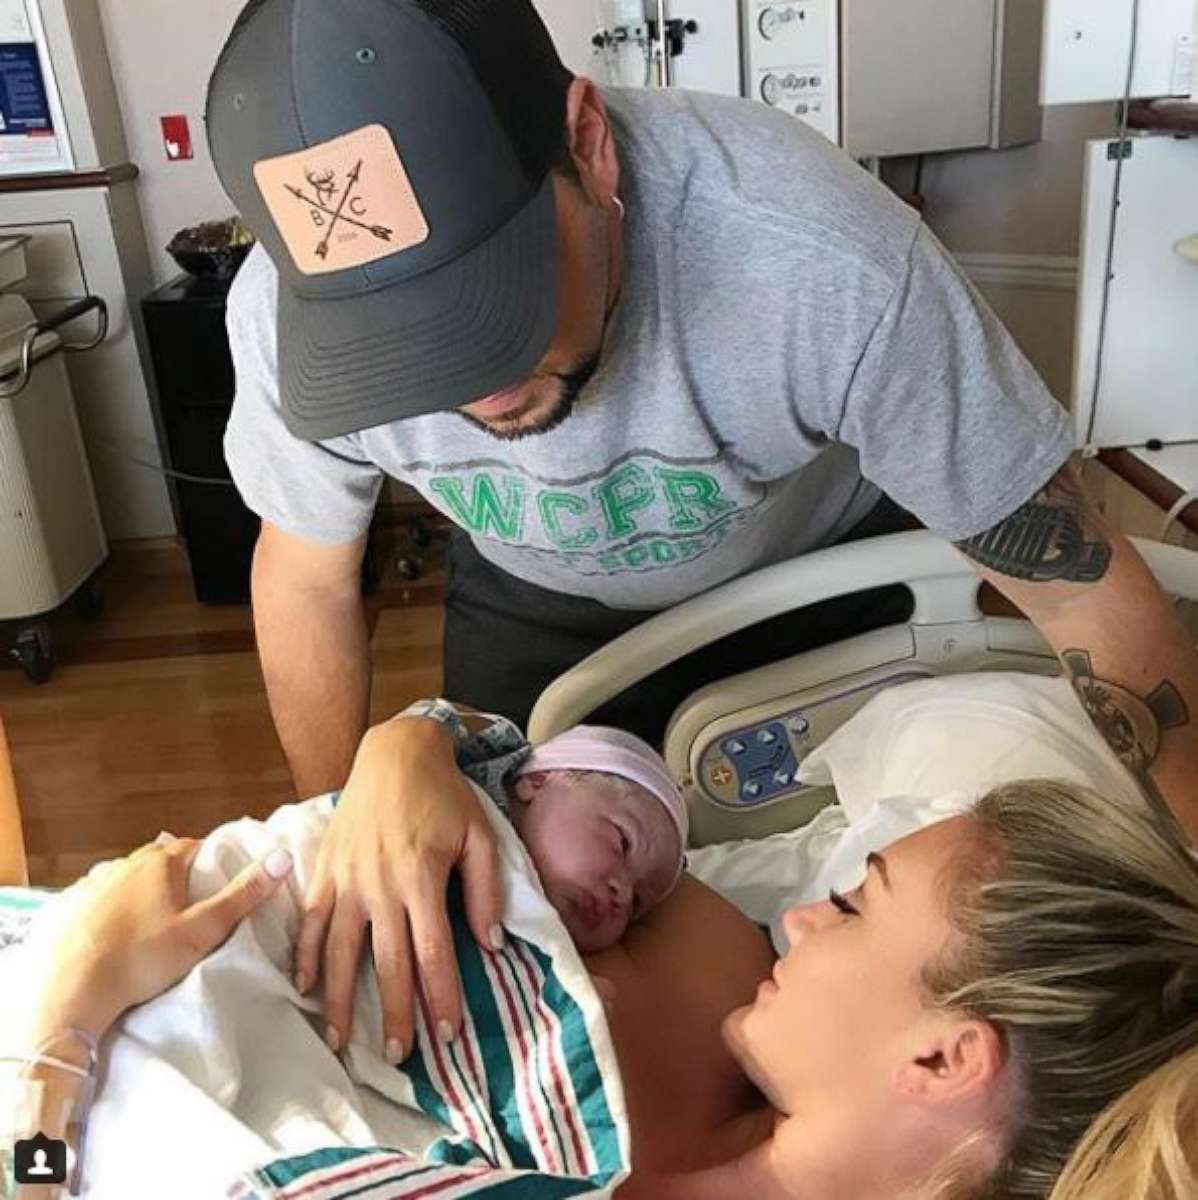 PHOTO: Jason Aldean posted this photo of his wife and newborn son to his Instagram account, Dec. 1, 2017.